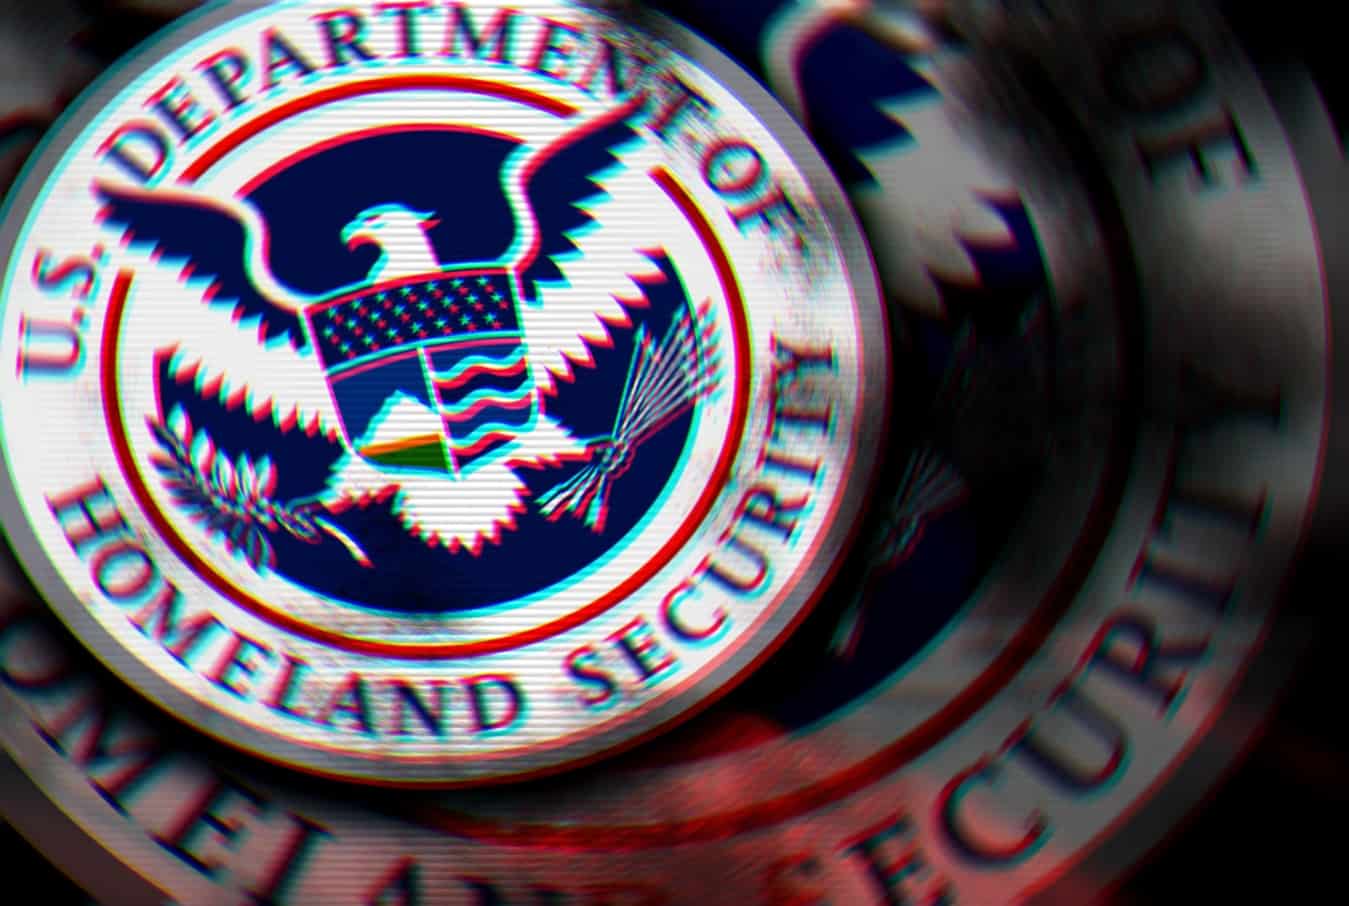 Russian hackers also hacked Department of Homeland Security - Report